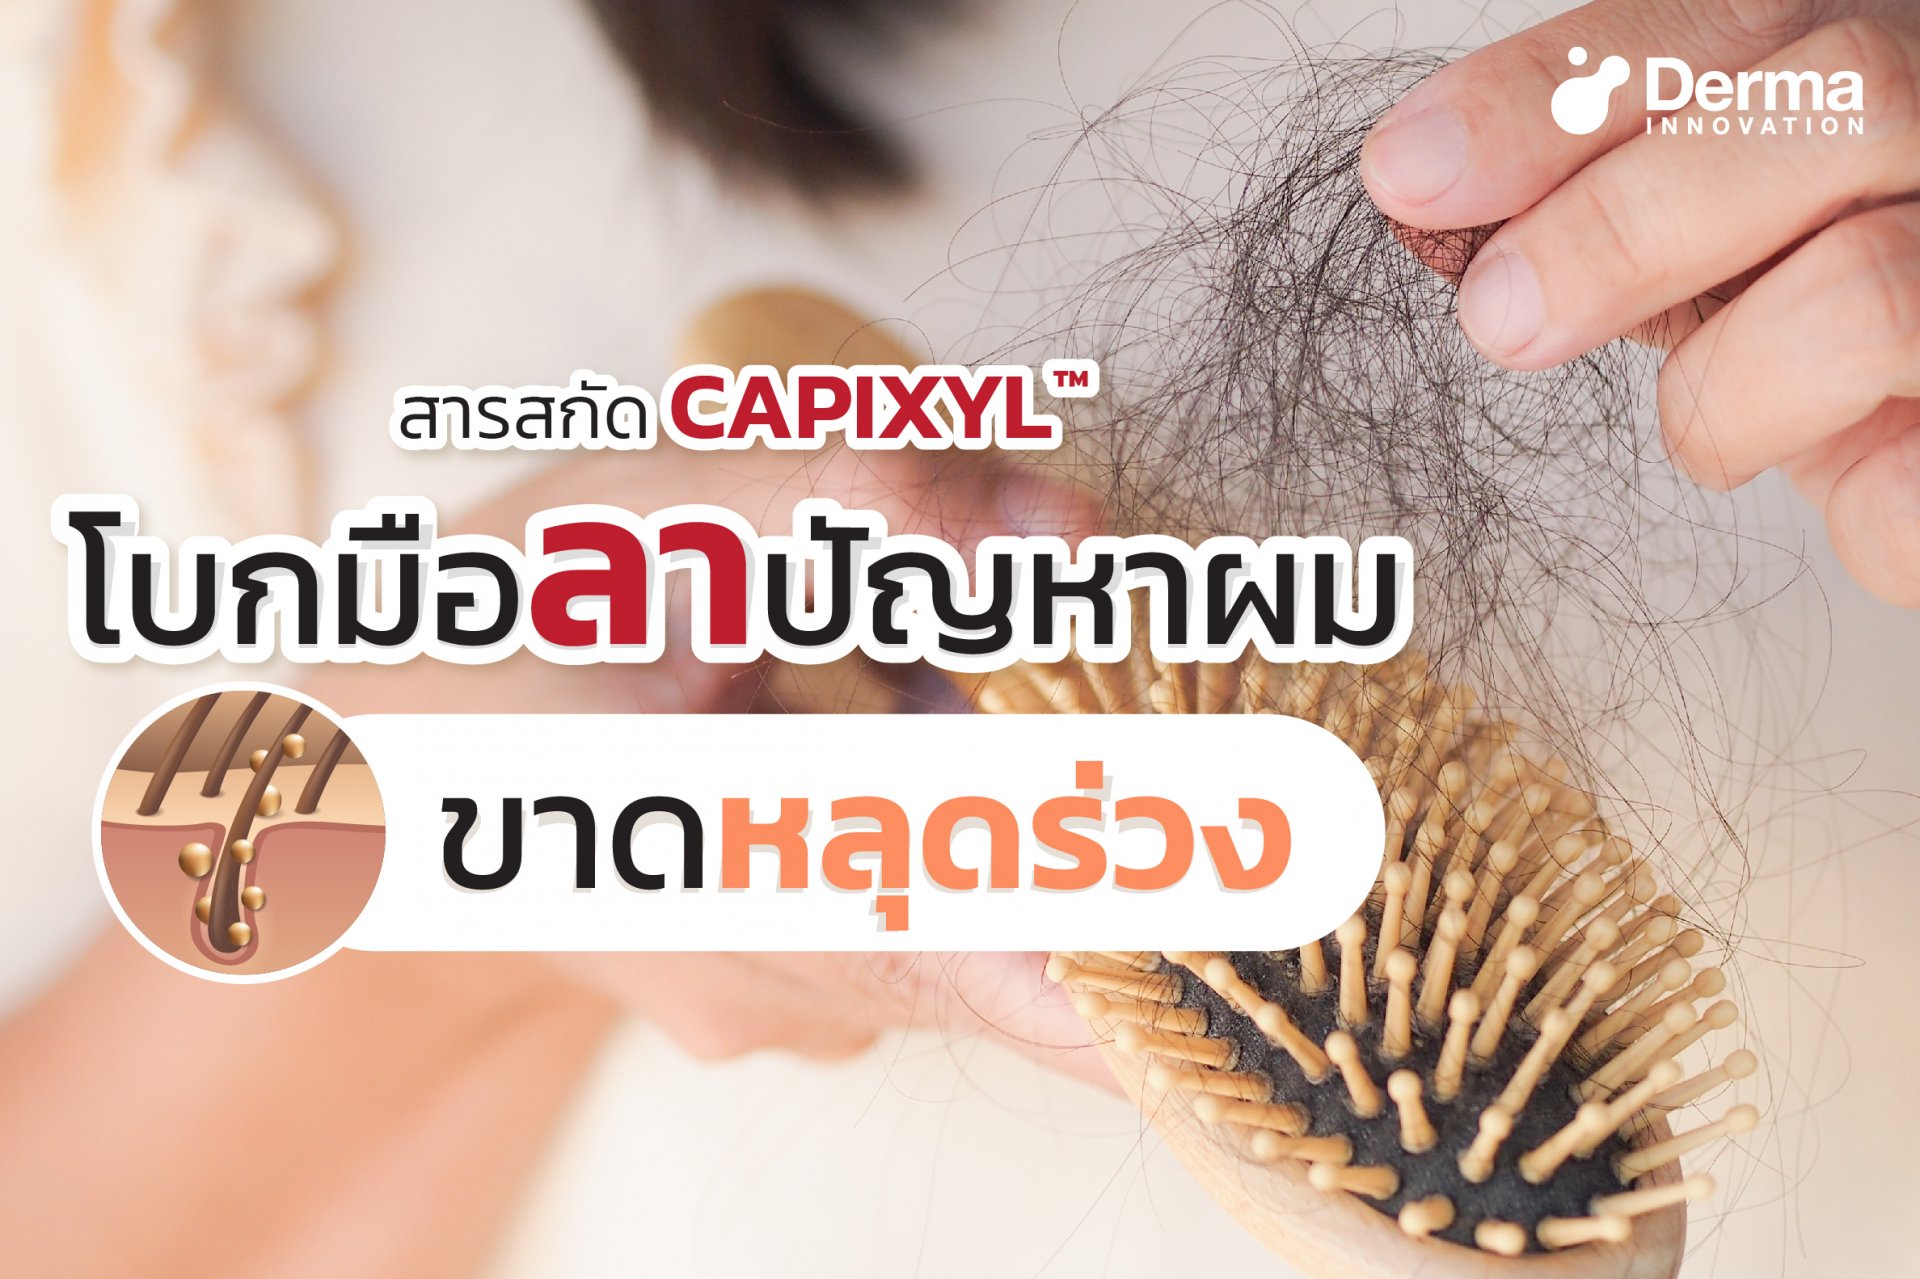 CAPIXYL™ innovation waves goodbye to hair loss problems